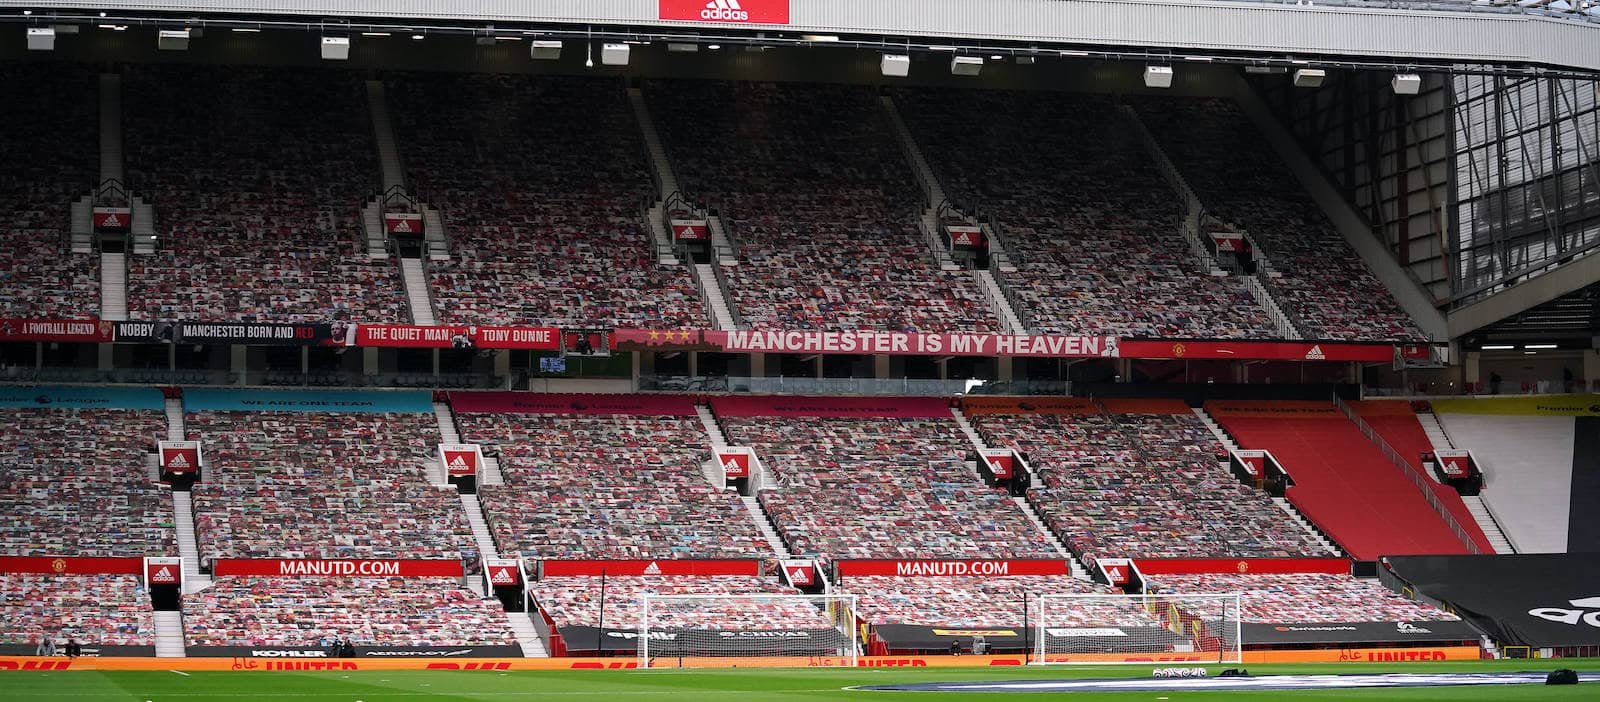 Man United respond after Norman Whiteside’s wife accuses club of “dumping” them out of Old Trafford seat – Man United News And Transfer News